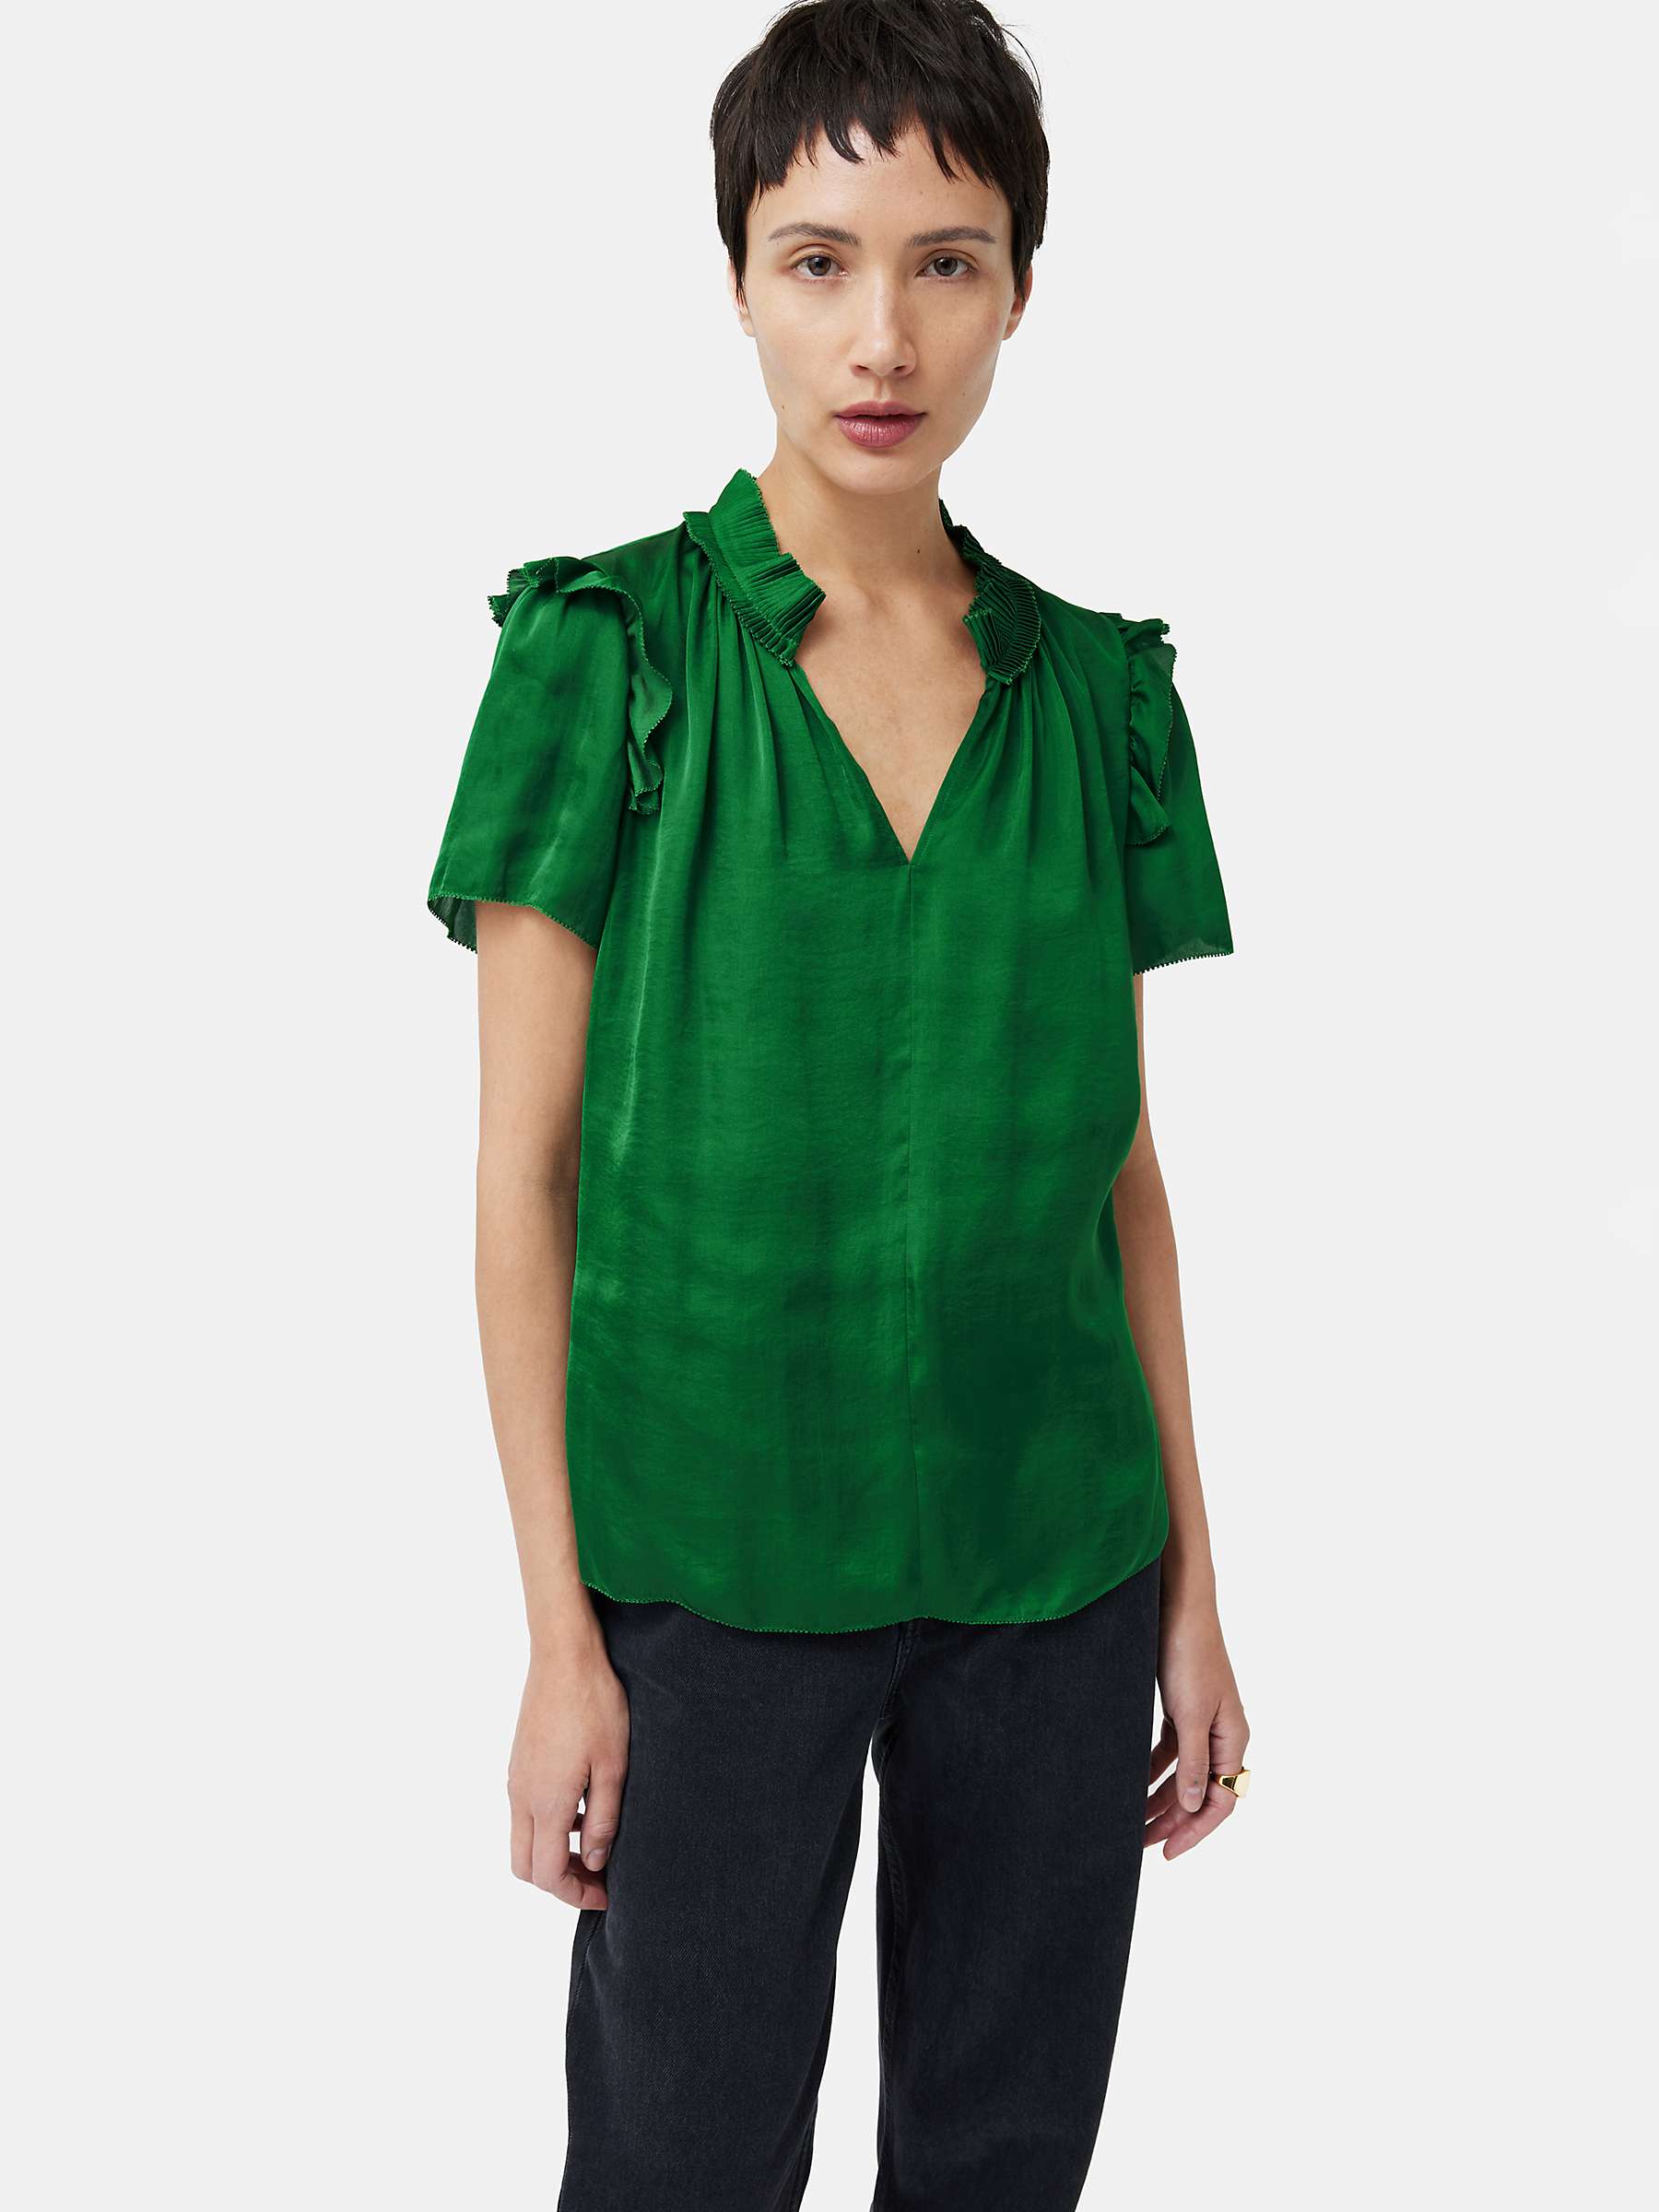 Buy Jigsaw Recycled Satin Ruffle Top Online at johnlewis.com